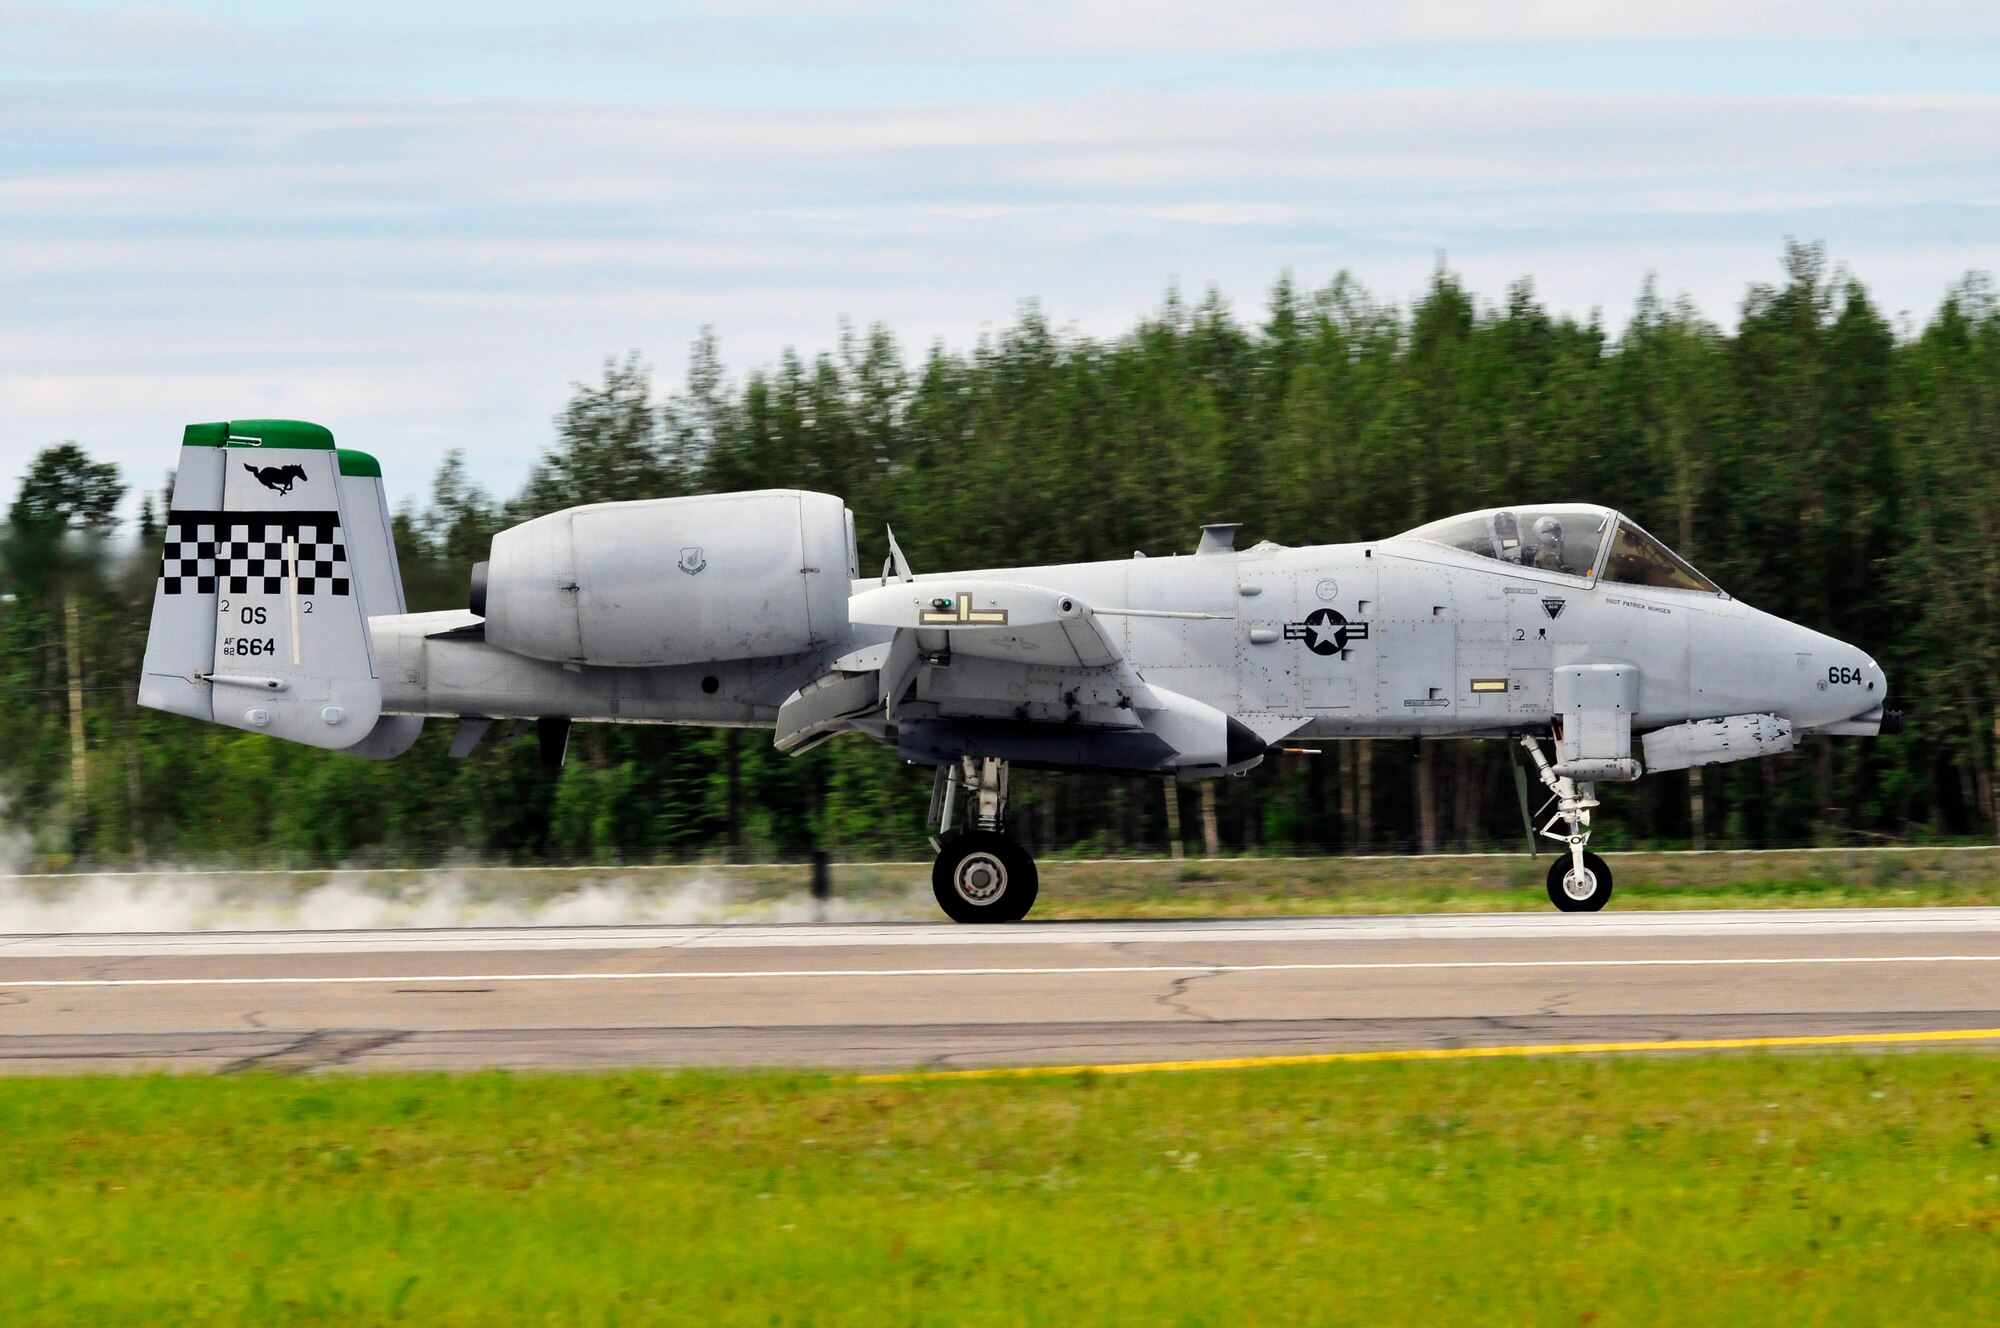 An A-10 Thunderbolt II lands on the runway July 15, 2011, Eielson Air Force Base, Alaska.  Much of the training performed at Eielson is not easily completed by the 25th Fighter Squadron from Osan, Republic of Korea, making large combat training exerices like RED FLAG-Alaska and Distant Frontier critical in helping meet qualifications for A-10 pilots.  By presenting pilots with multiple challenges in the Joint Pacific Alaska Range Complex, the 25th FS can properly exploit the heavy armament and weaponry the A-10 brings to combat and comply with annual training requirements.  (U.S. Air Force photo by/Staff Sgt. Miguel Lara III)